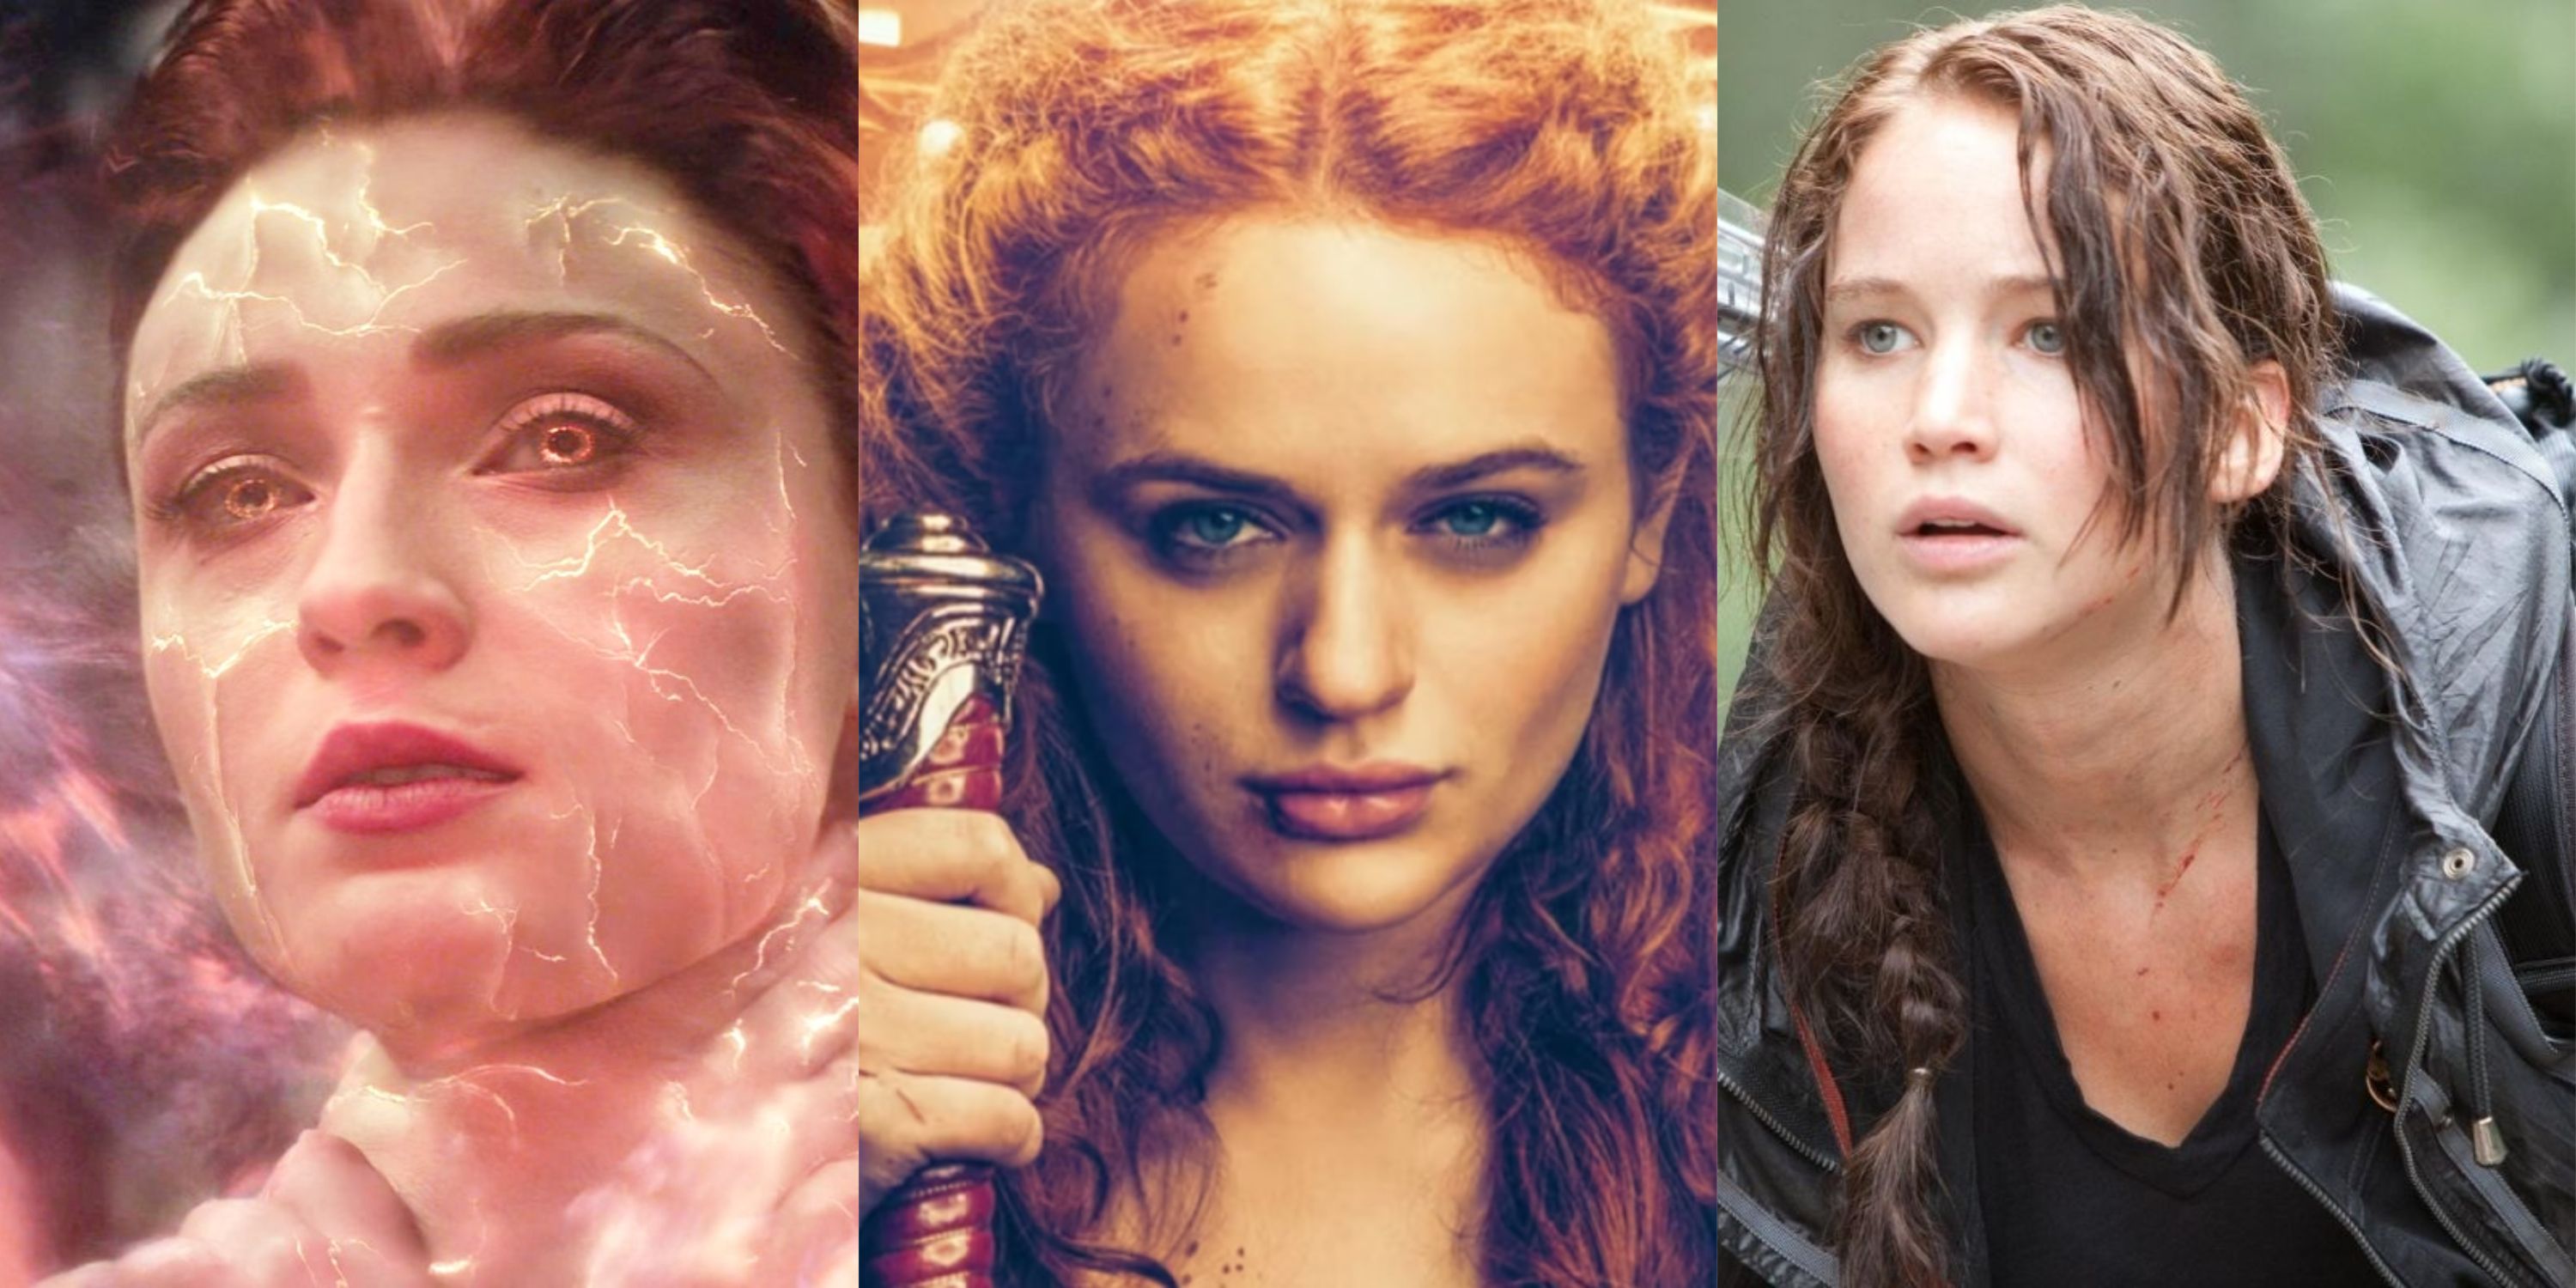 Clips from the movies Dark Phoenix, The Princess, and The Hunger Games.